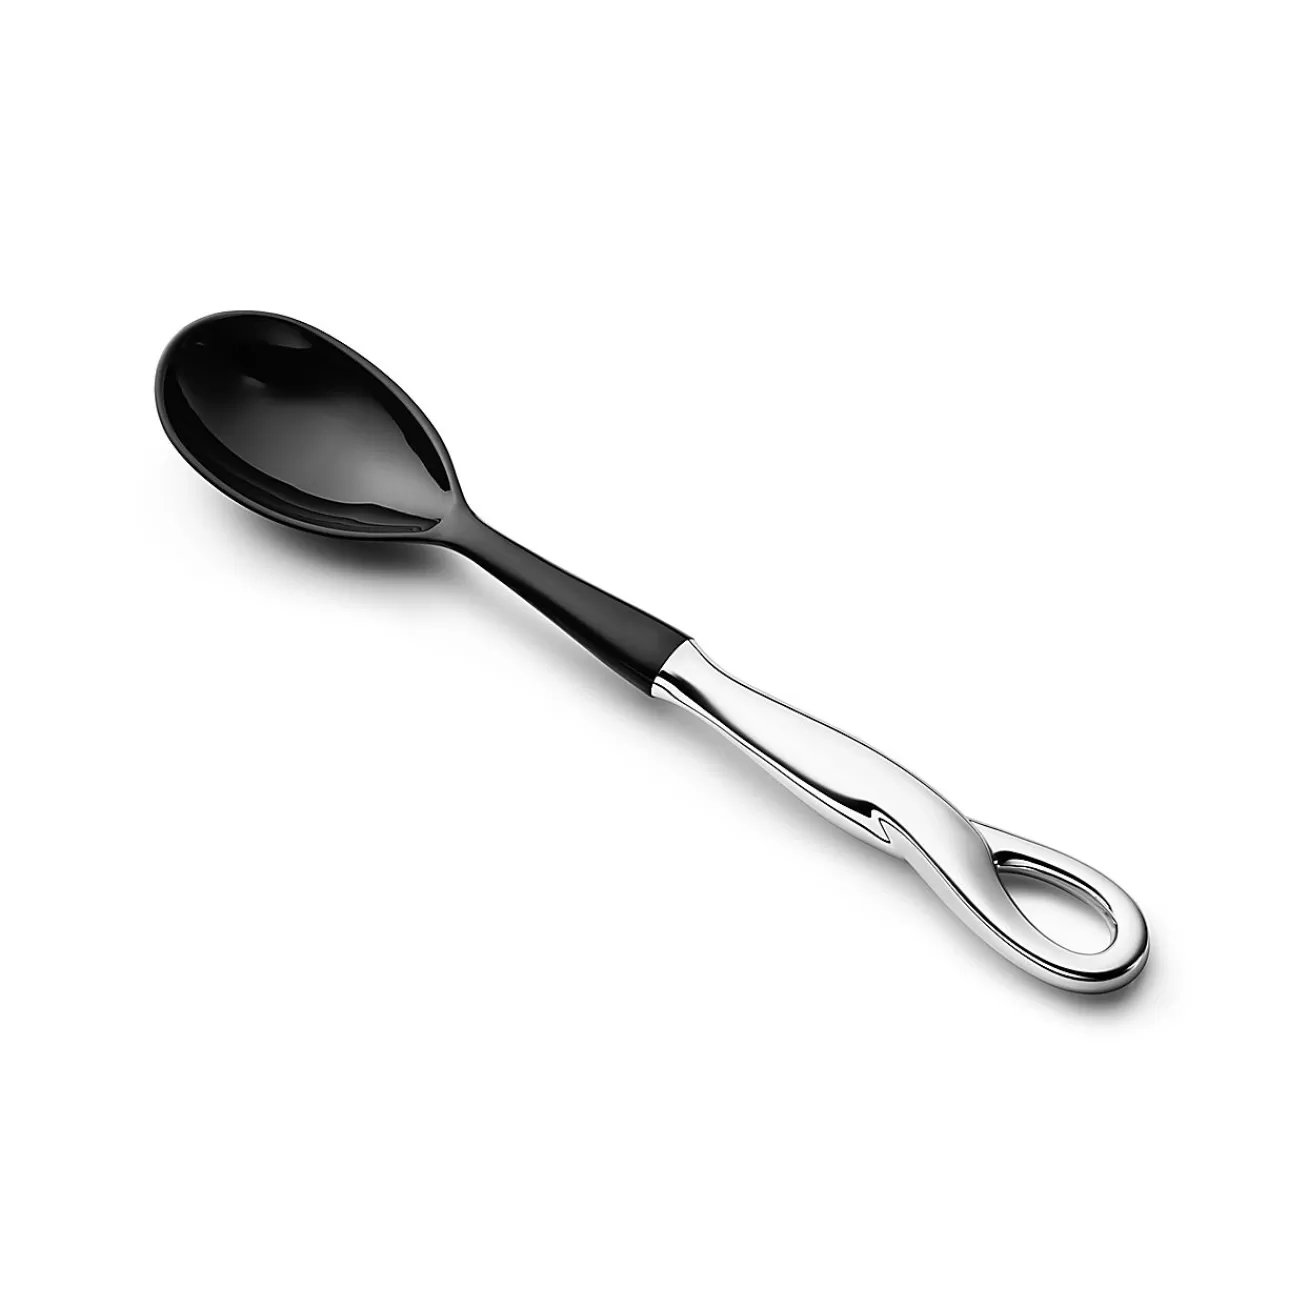 Tiffany & Co. Elsa Peretti® Padova™ salad serving spoon in sterling silver and resin. | ^ Tableware | Flatware & Trays